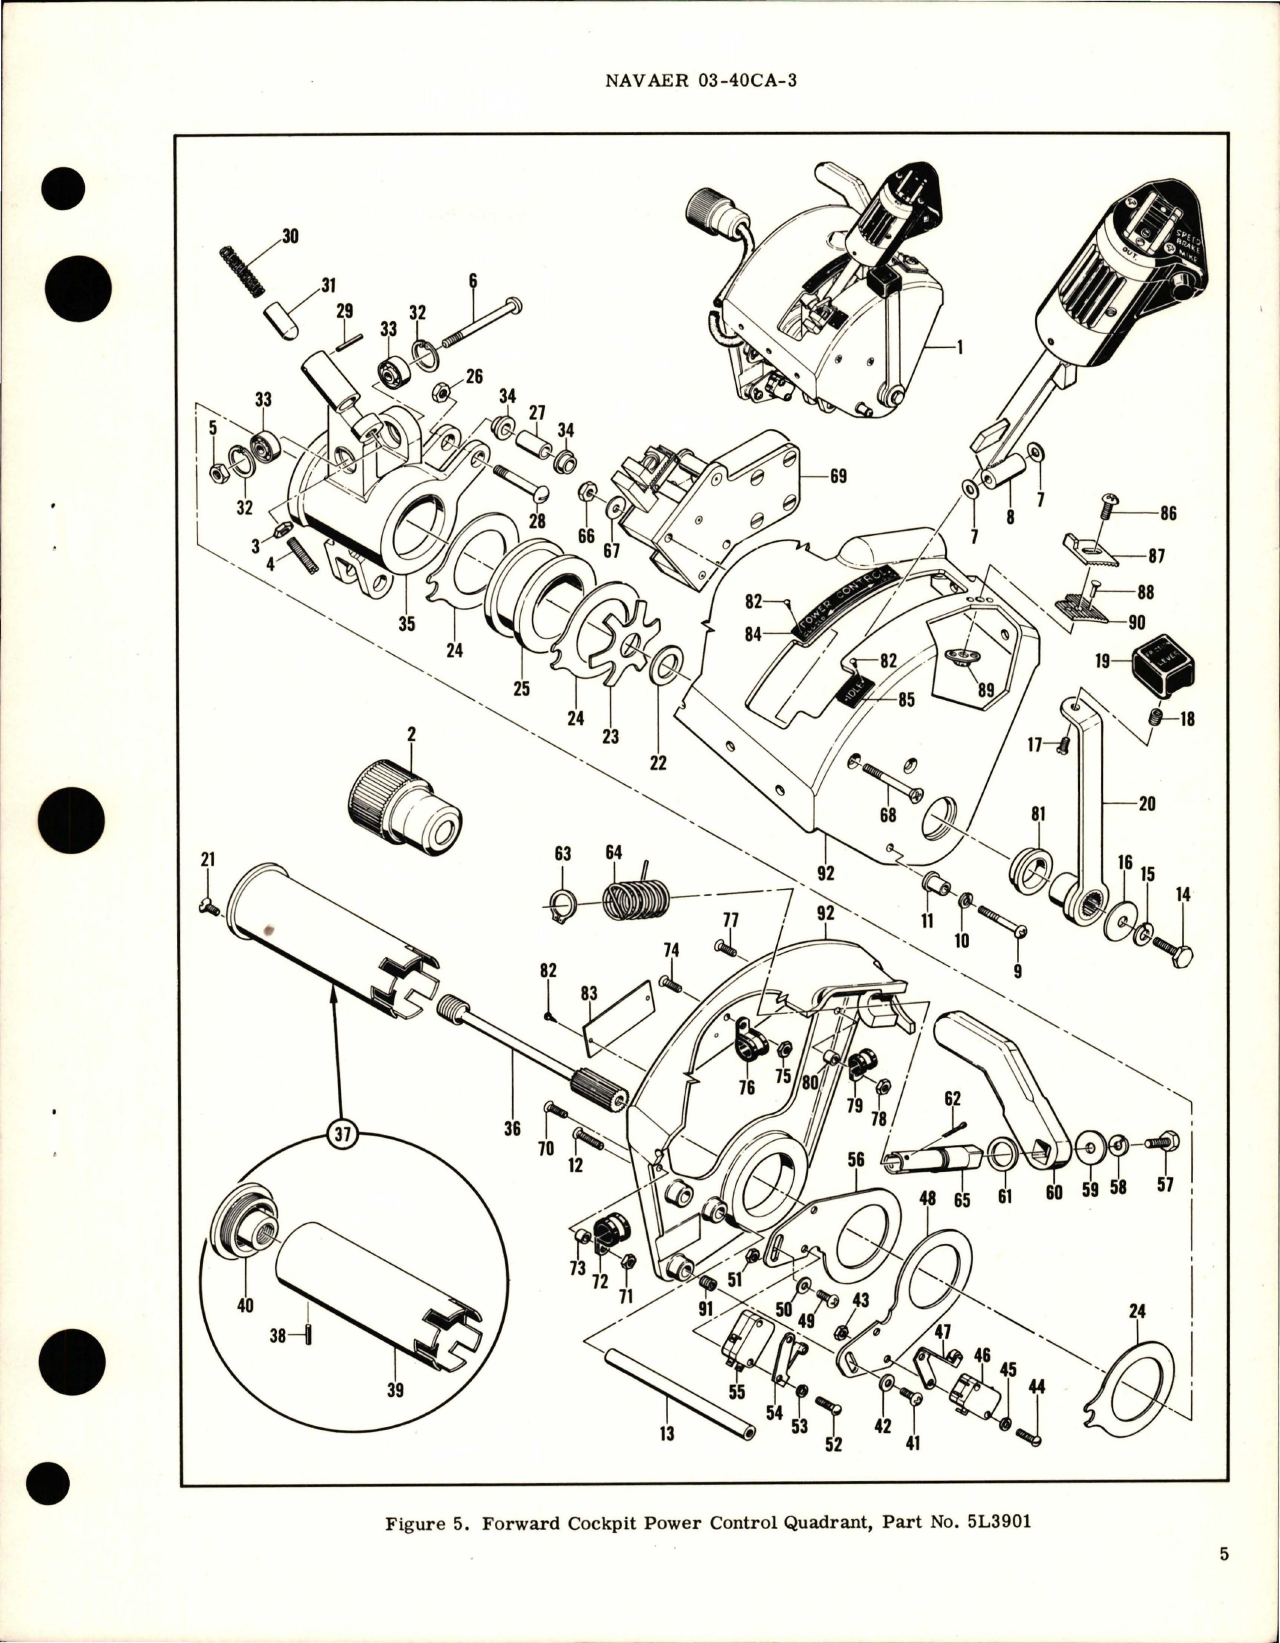 Sample page 5 from AirCorps Library document: Overhaul Instructions with Parts Breakdown for Cockpit Power Control Quadrant - Parts 5L3901 and 5L3902